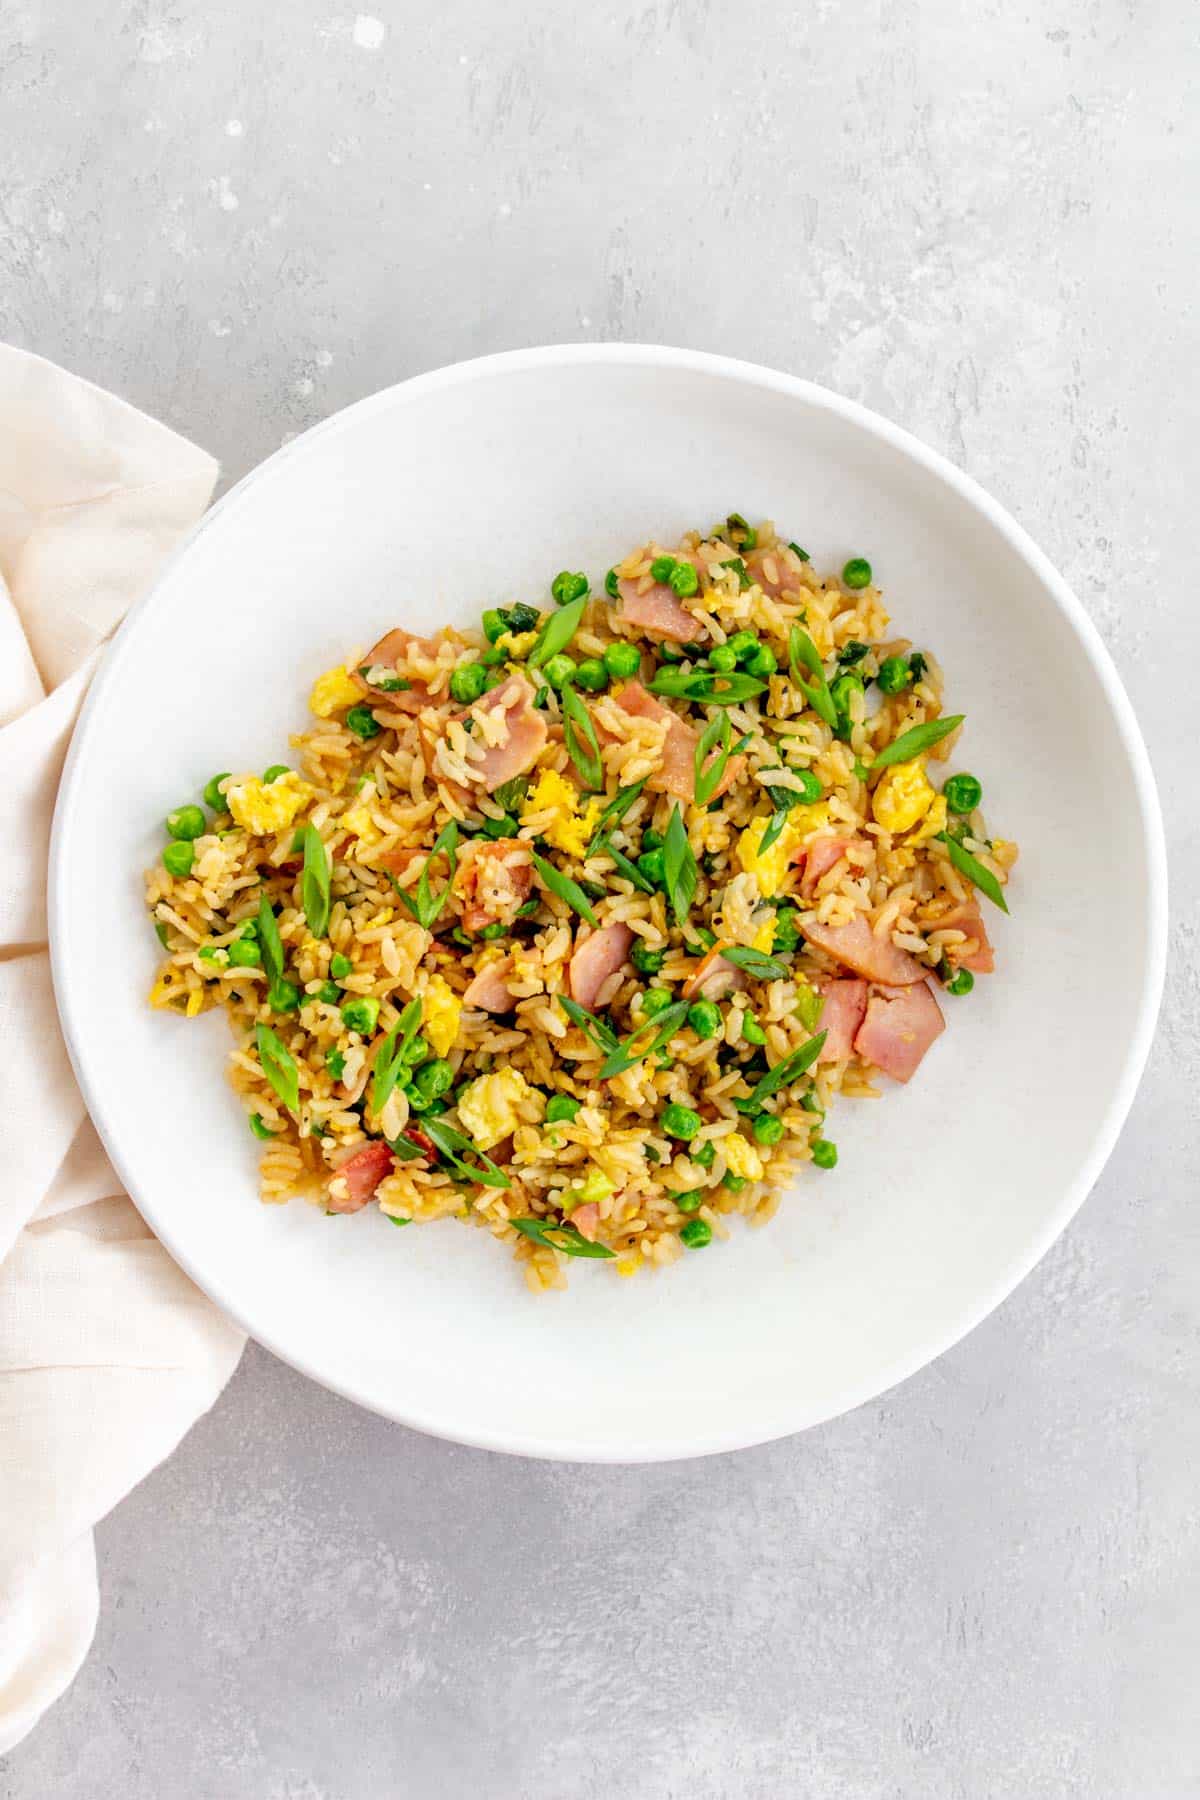 Overhead view of a plate of Japanese fried rice with green onions on top.